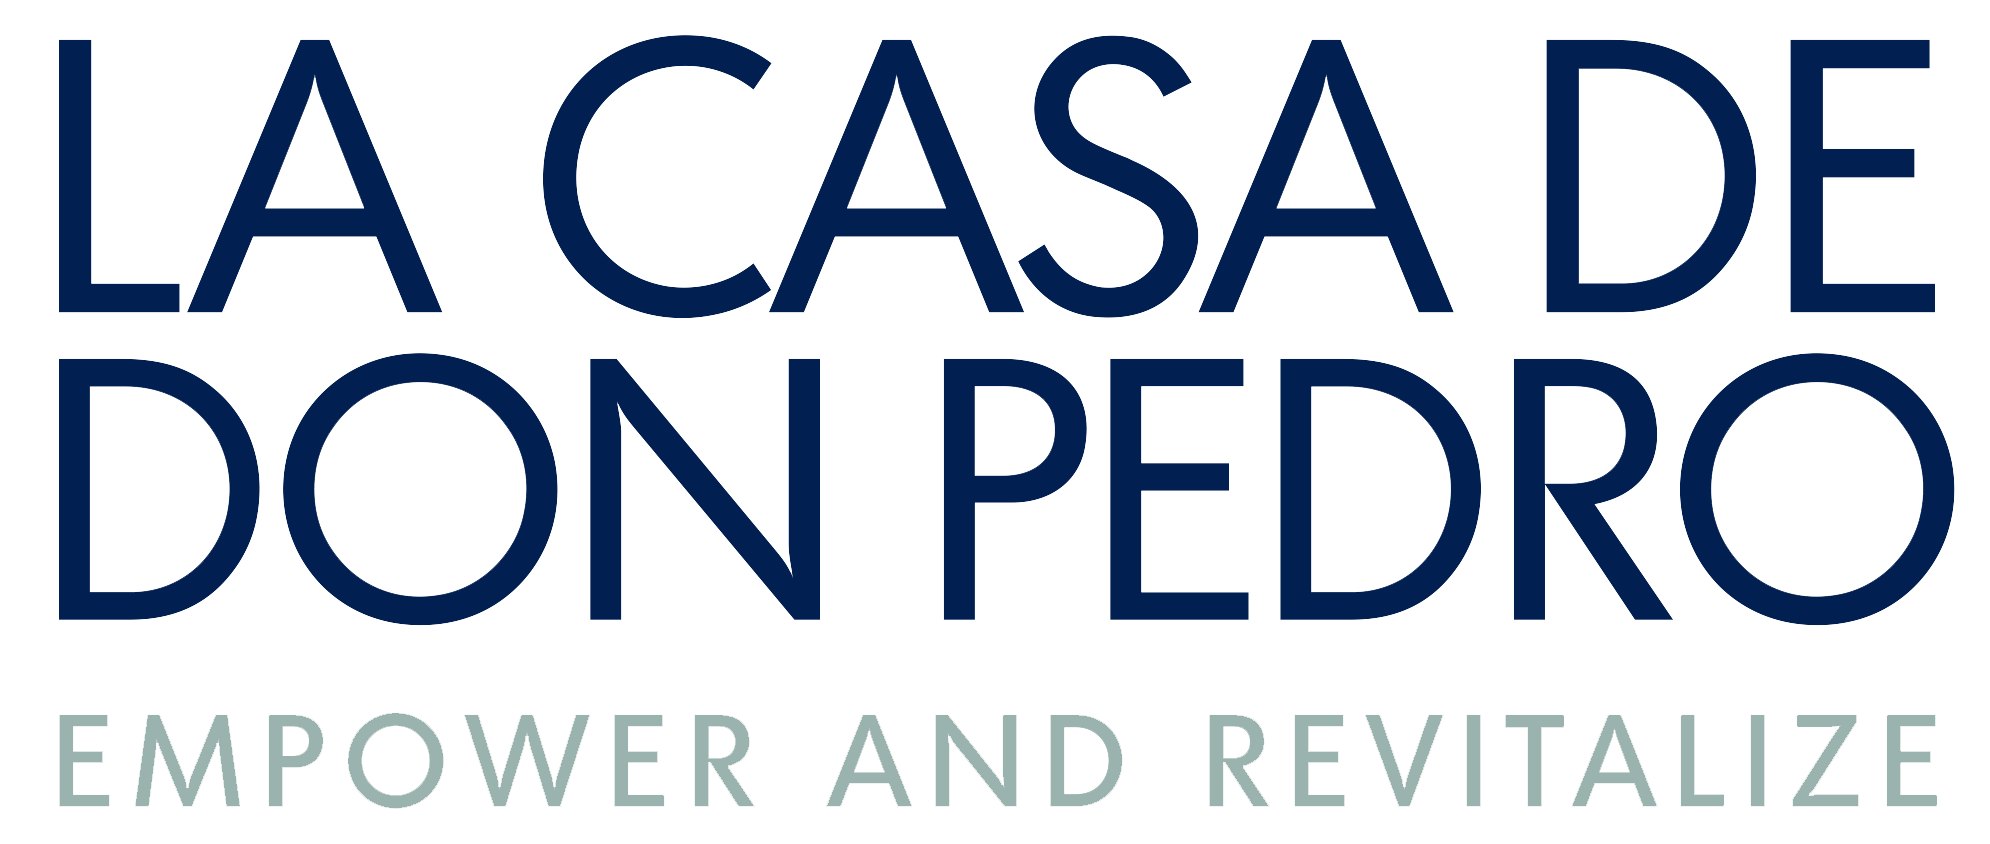 La Casa de Don Pedro is a comprehensive social service and community development organization with a mission to foster self-sufficiency, empowerment and neighborhood revitalization.